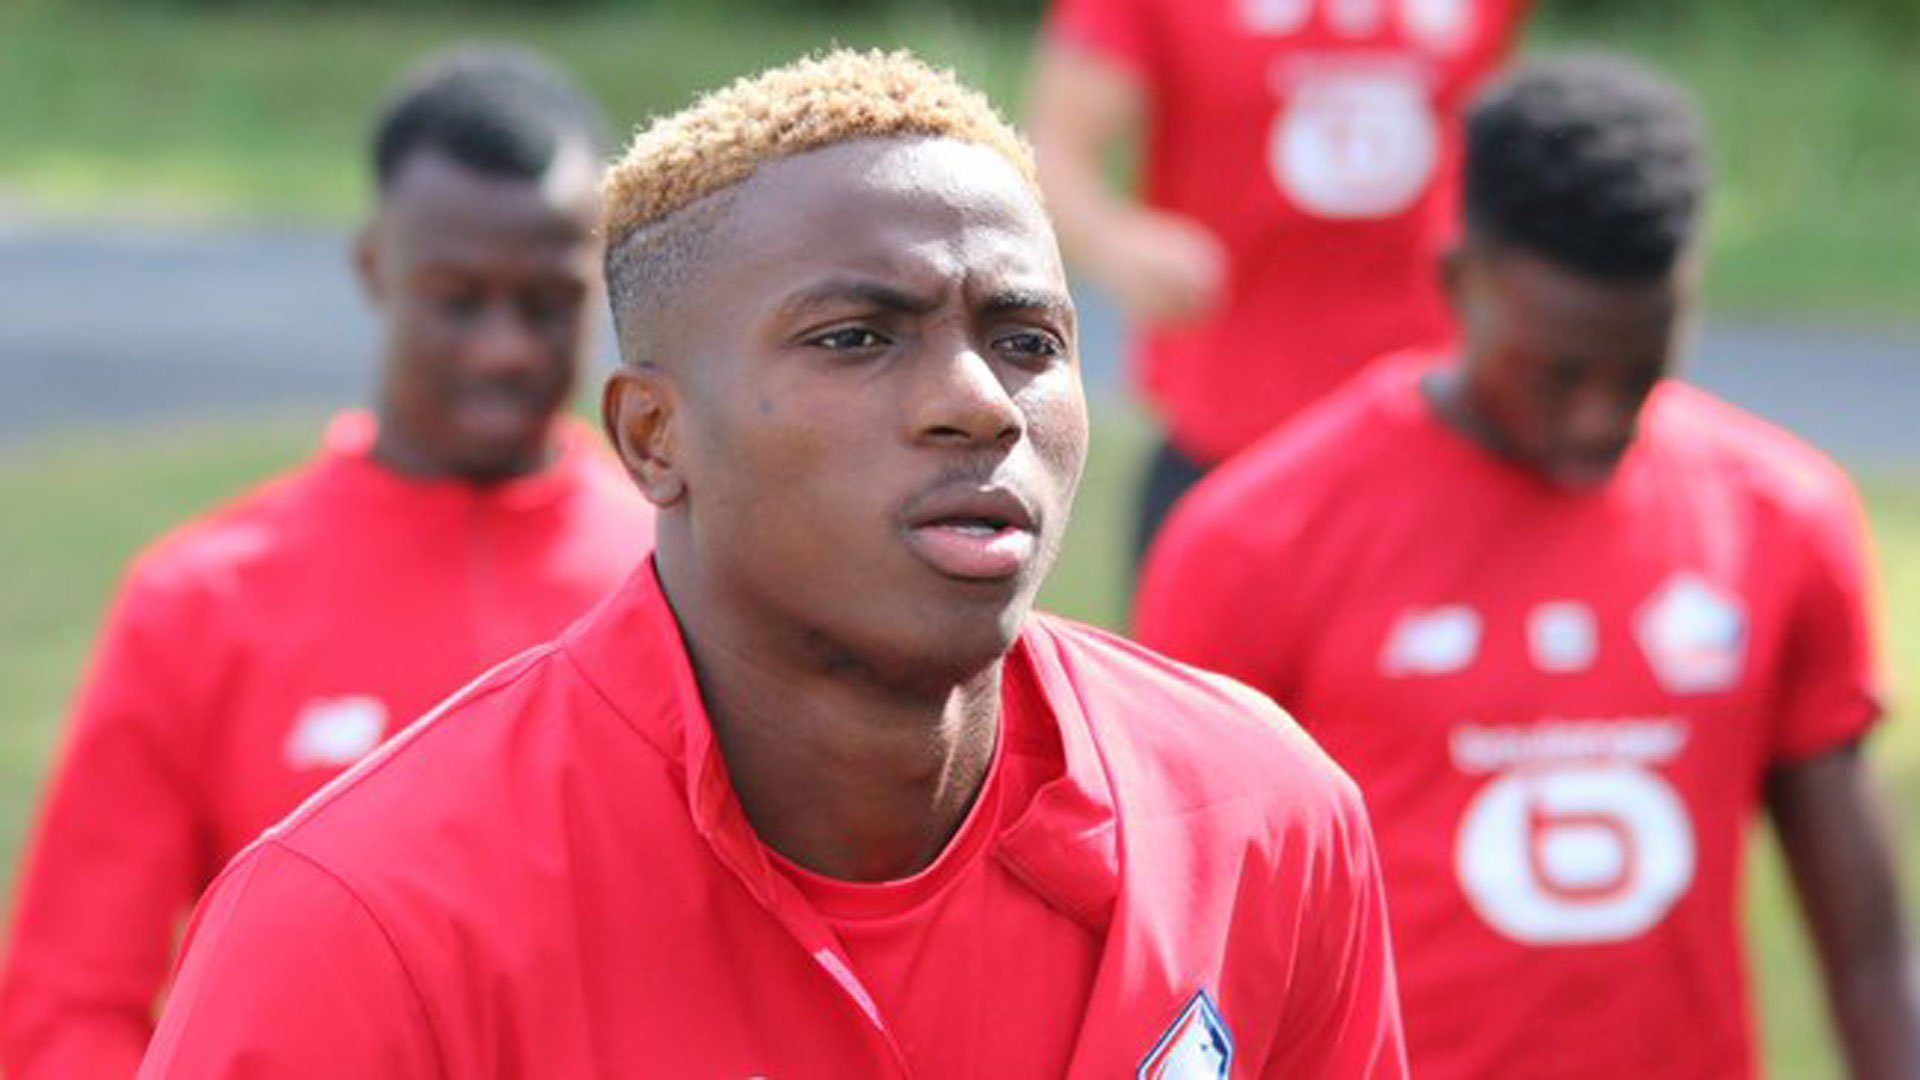 Lille will decide' striker, Victor Osimhen says after